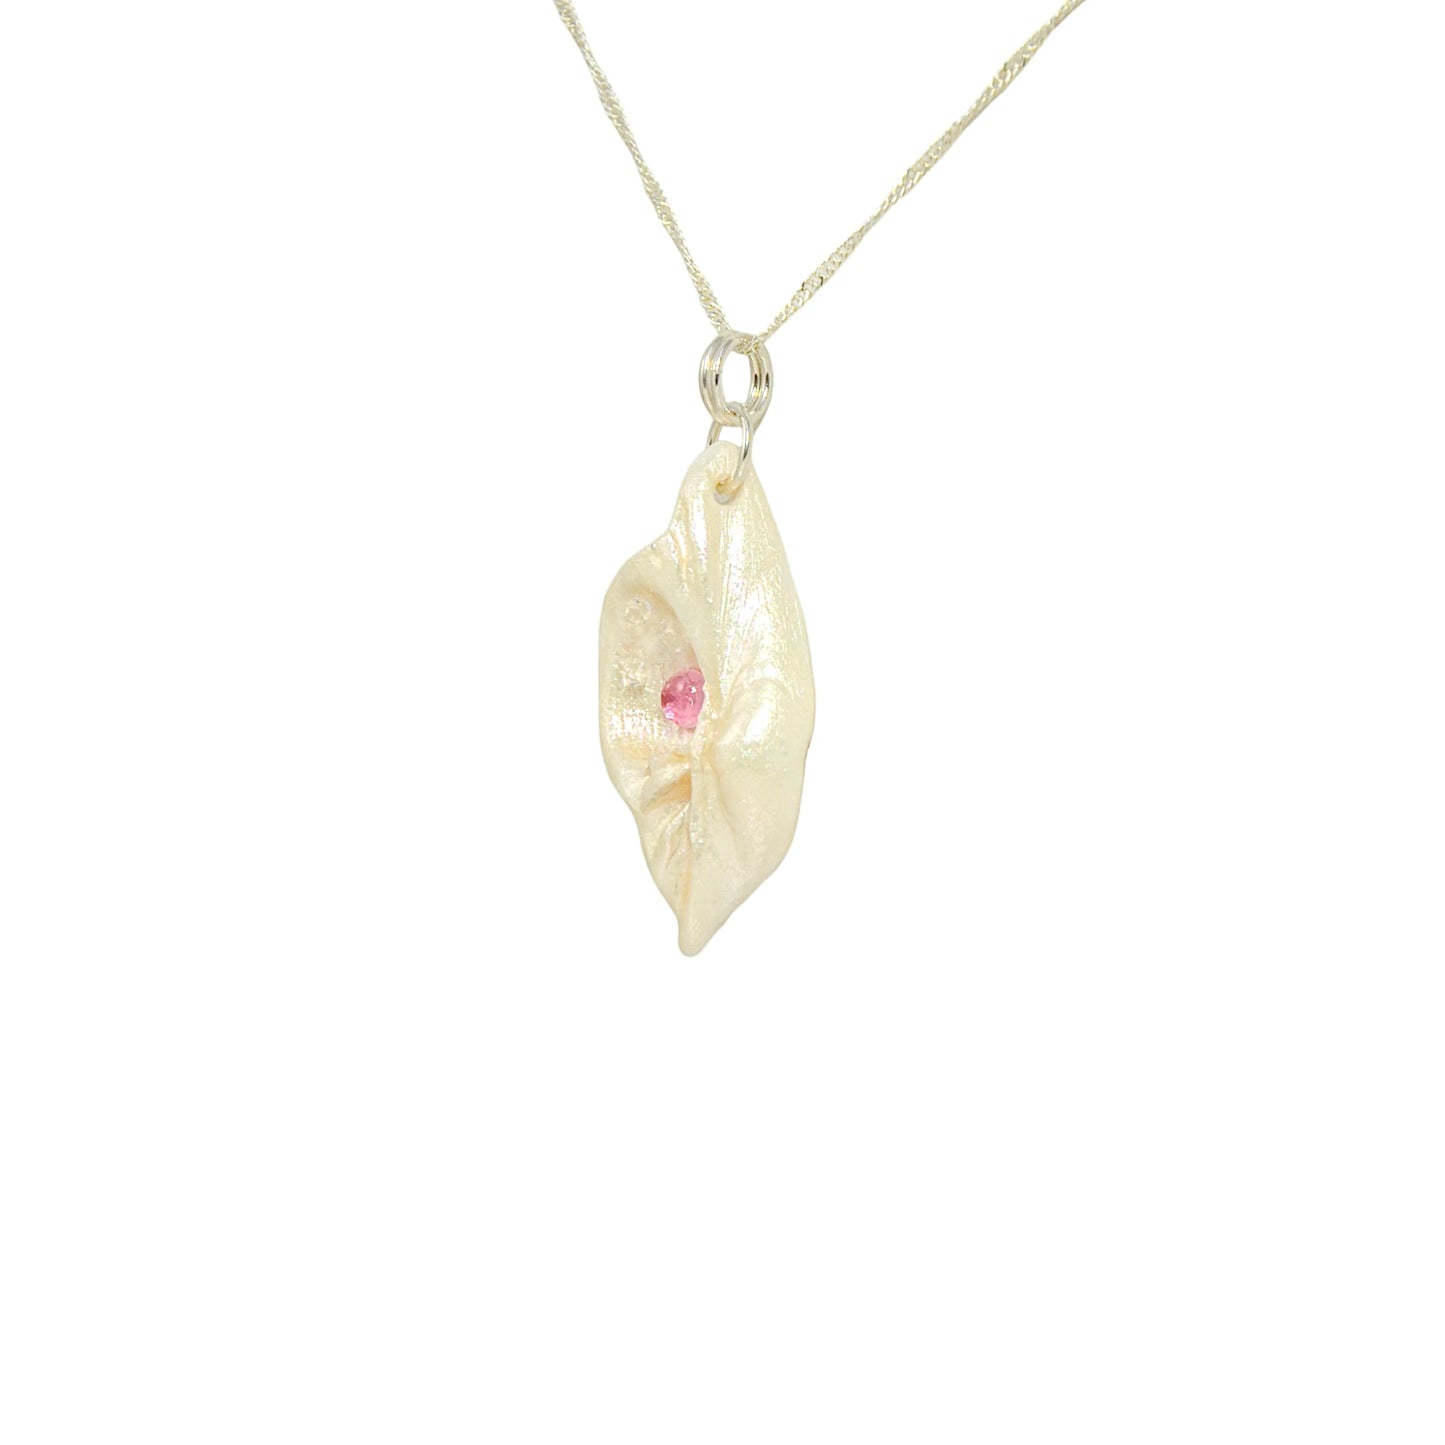 This natural seashell pendant has Pink Tourmaline gemstone and three Herkimer Diamonds that compliments the pendant. The pendant is turned to show the viewer the left side of the pendant.